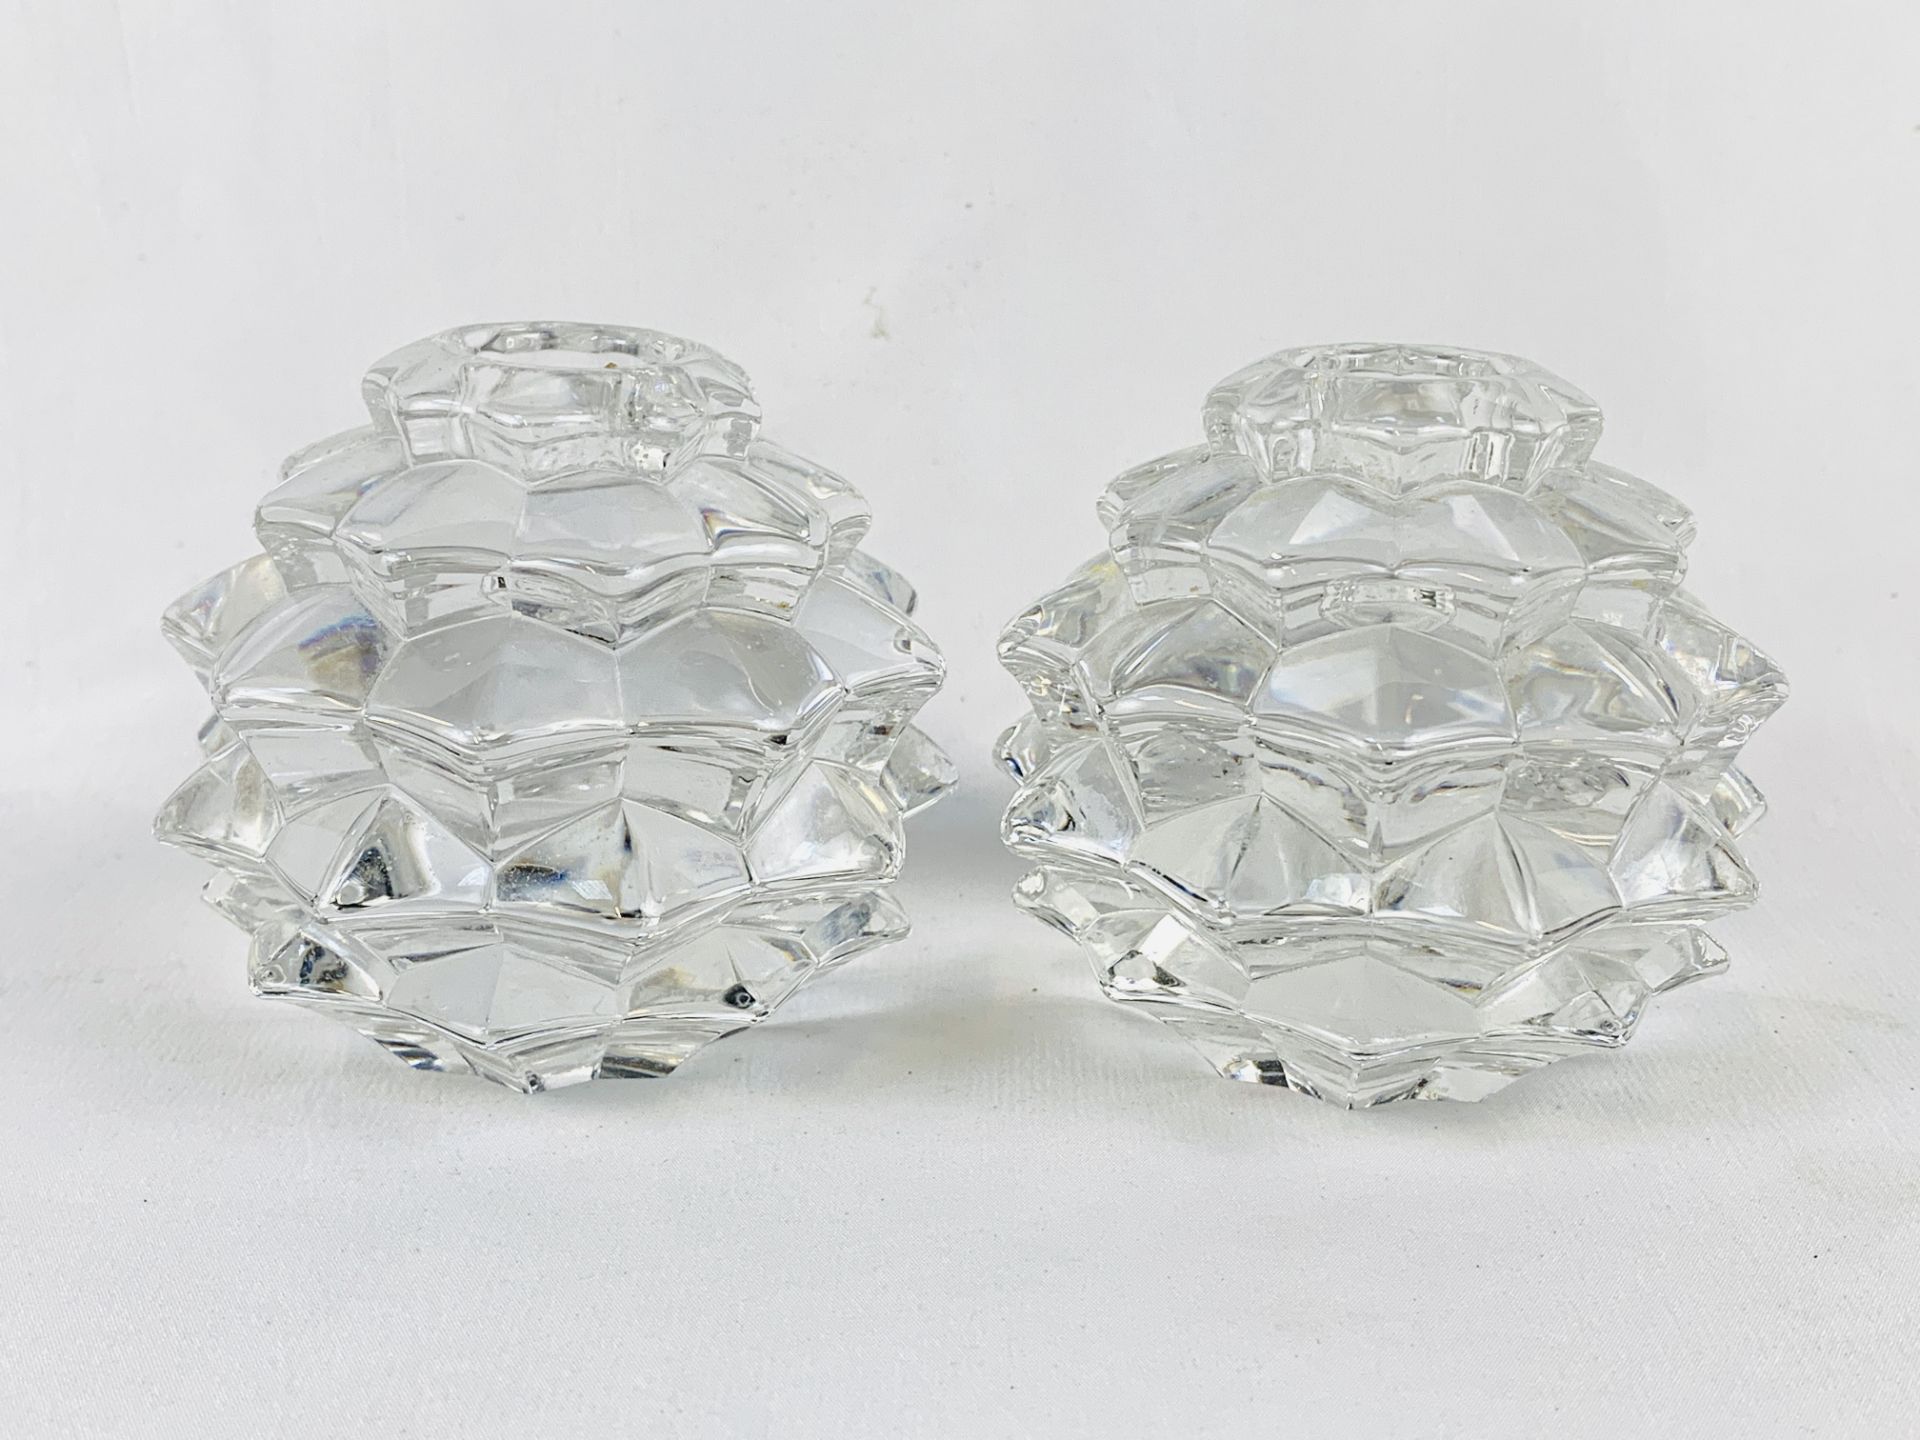 Pair of Tiffany & Co. glass candlesticks - Image 2 of 3